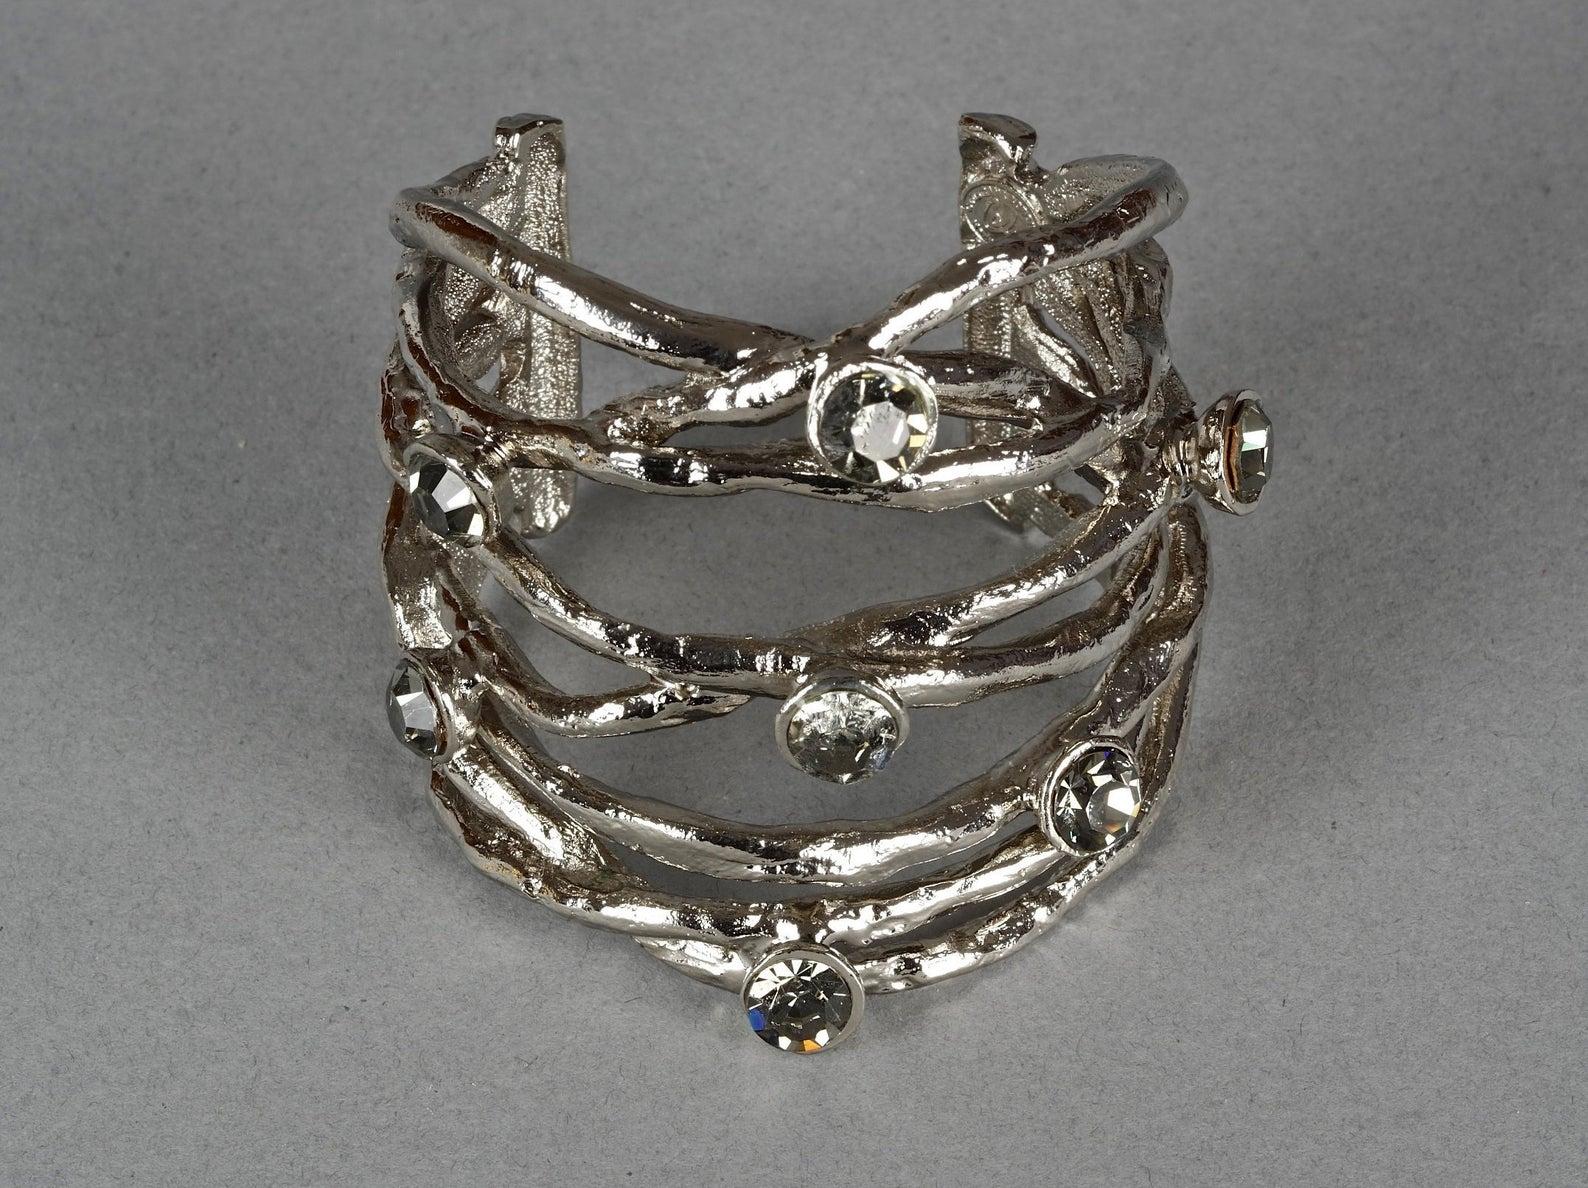 Vintage CHRISTIAN LACROIX Protruding Rhinestone Wire Cuff Bracelet In Excellent Condition For Sale In Kingersheim, Alsace